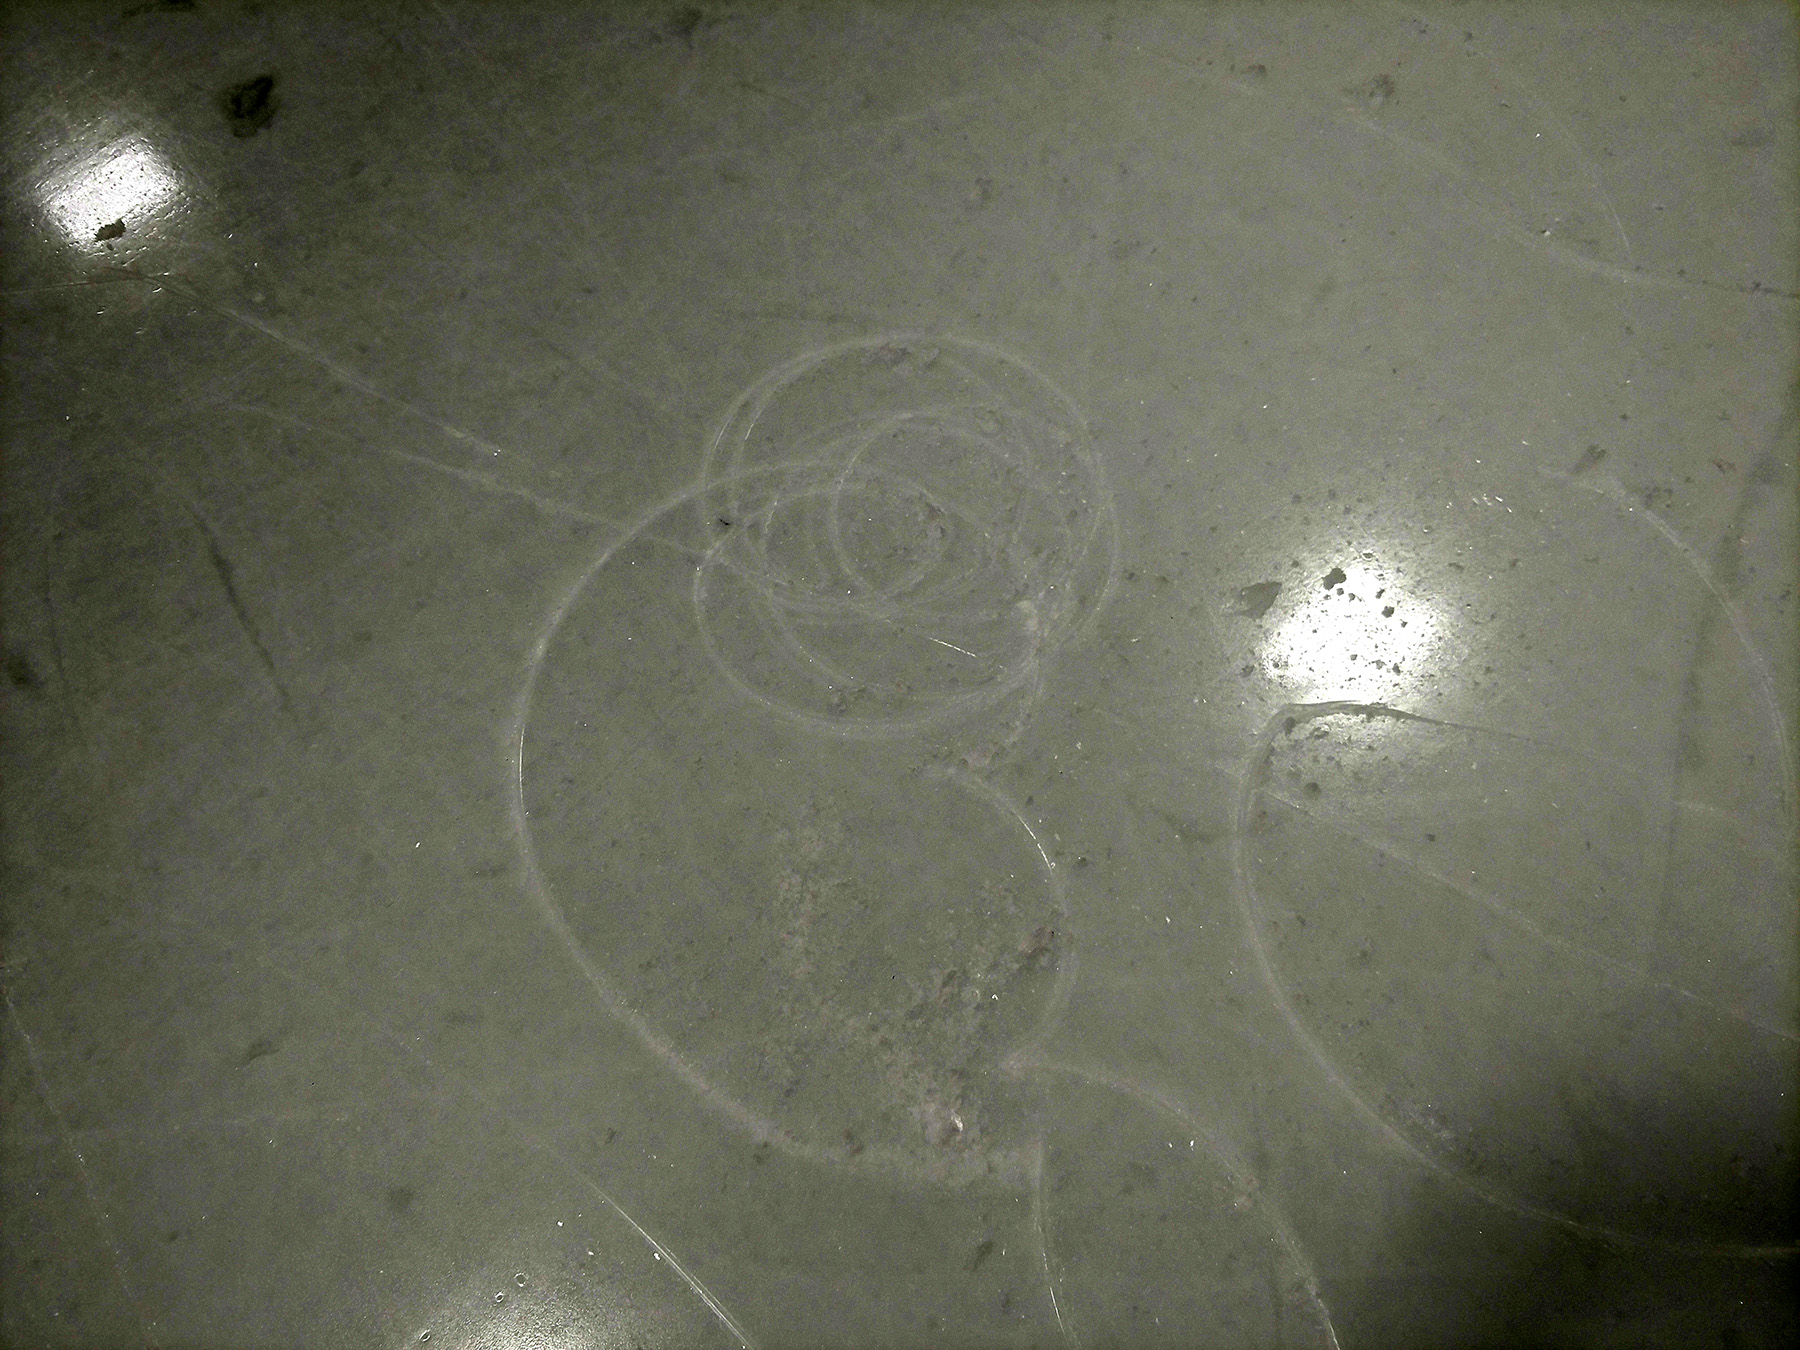 A tracing on the ice of a well centered spin.